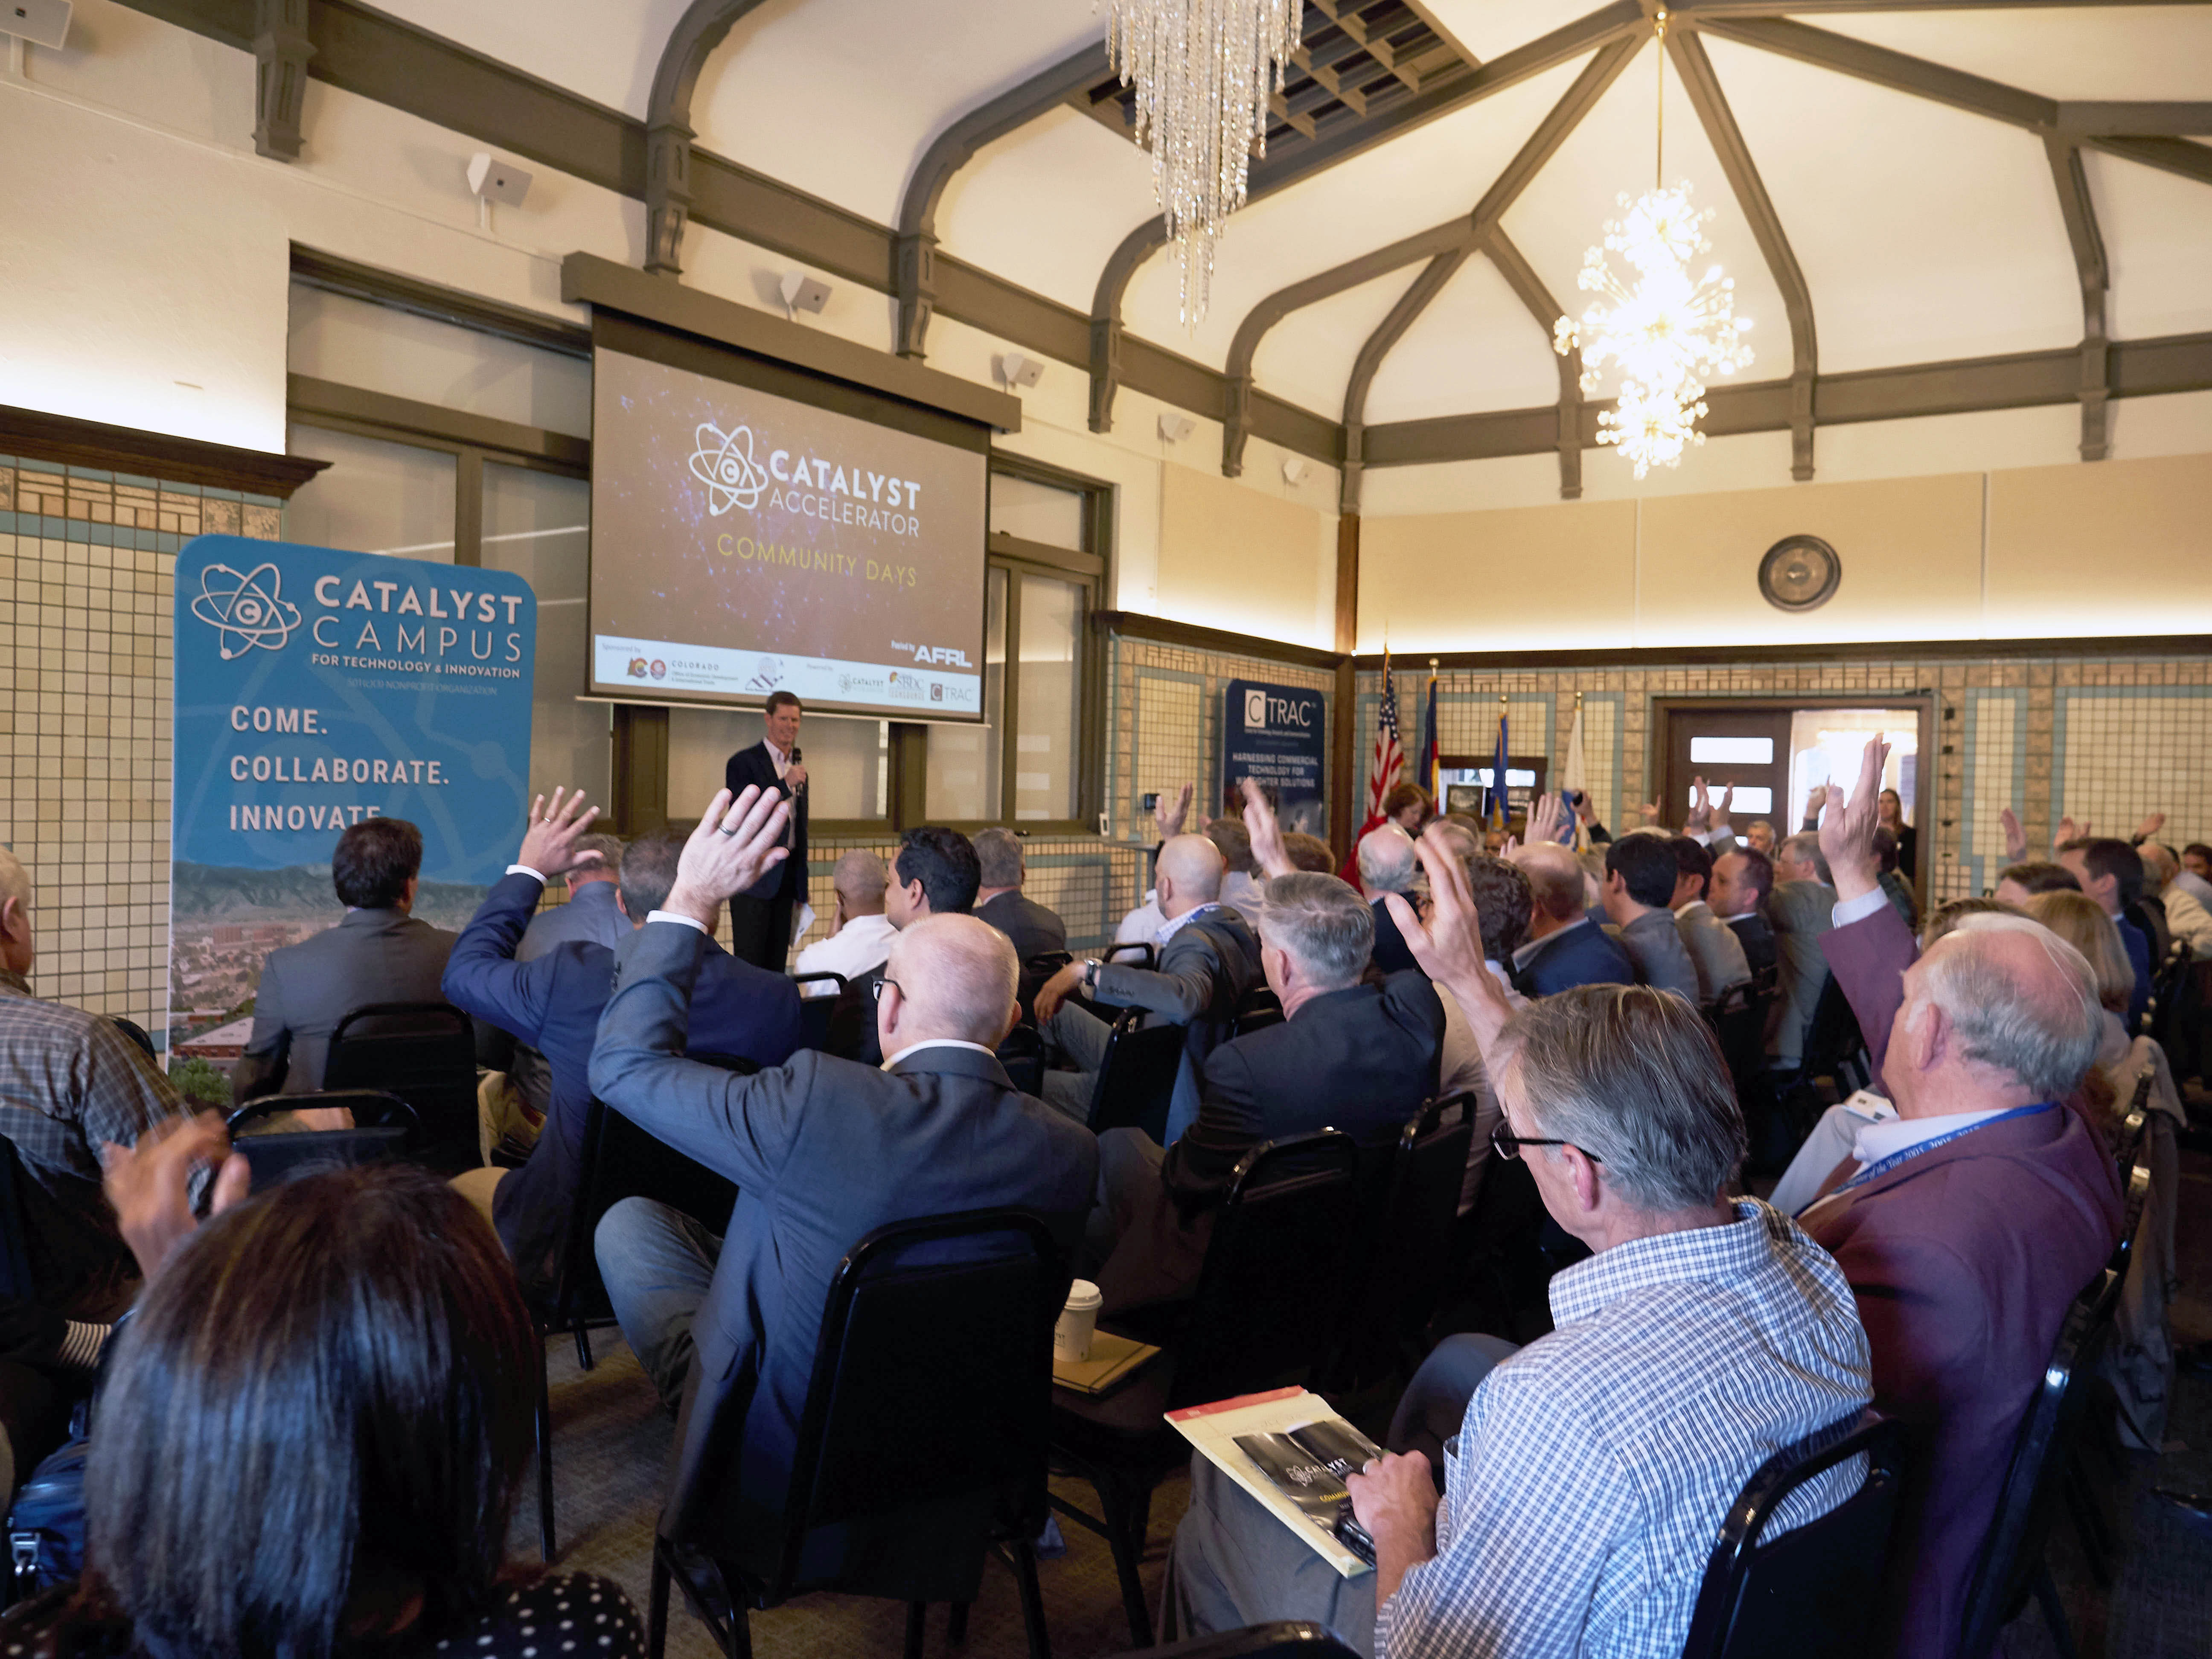 Industry, academia and government SMEs gather together in the historic 1917 Harvey House on the Catalyst Campus for Catalyst Space Accelerator Community Days.